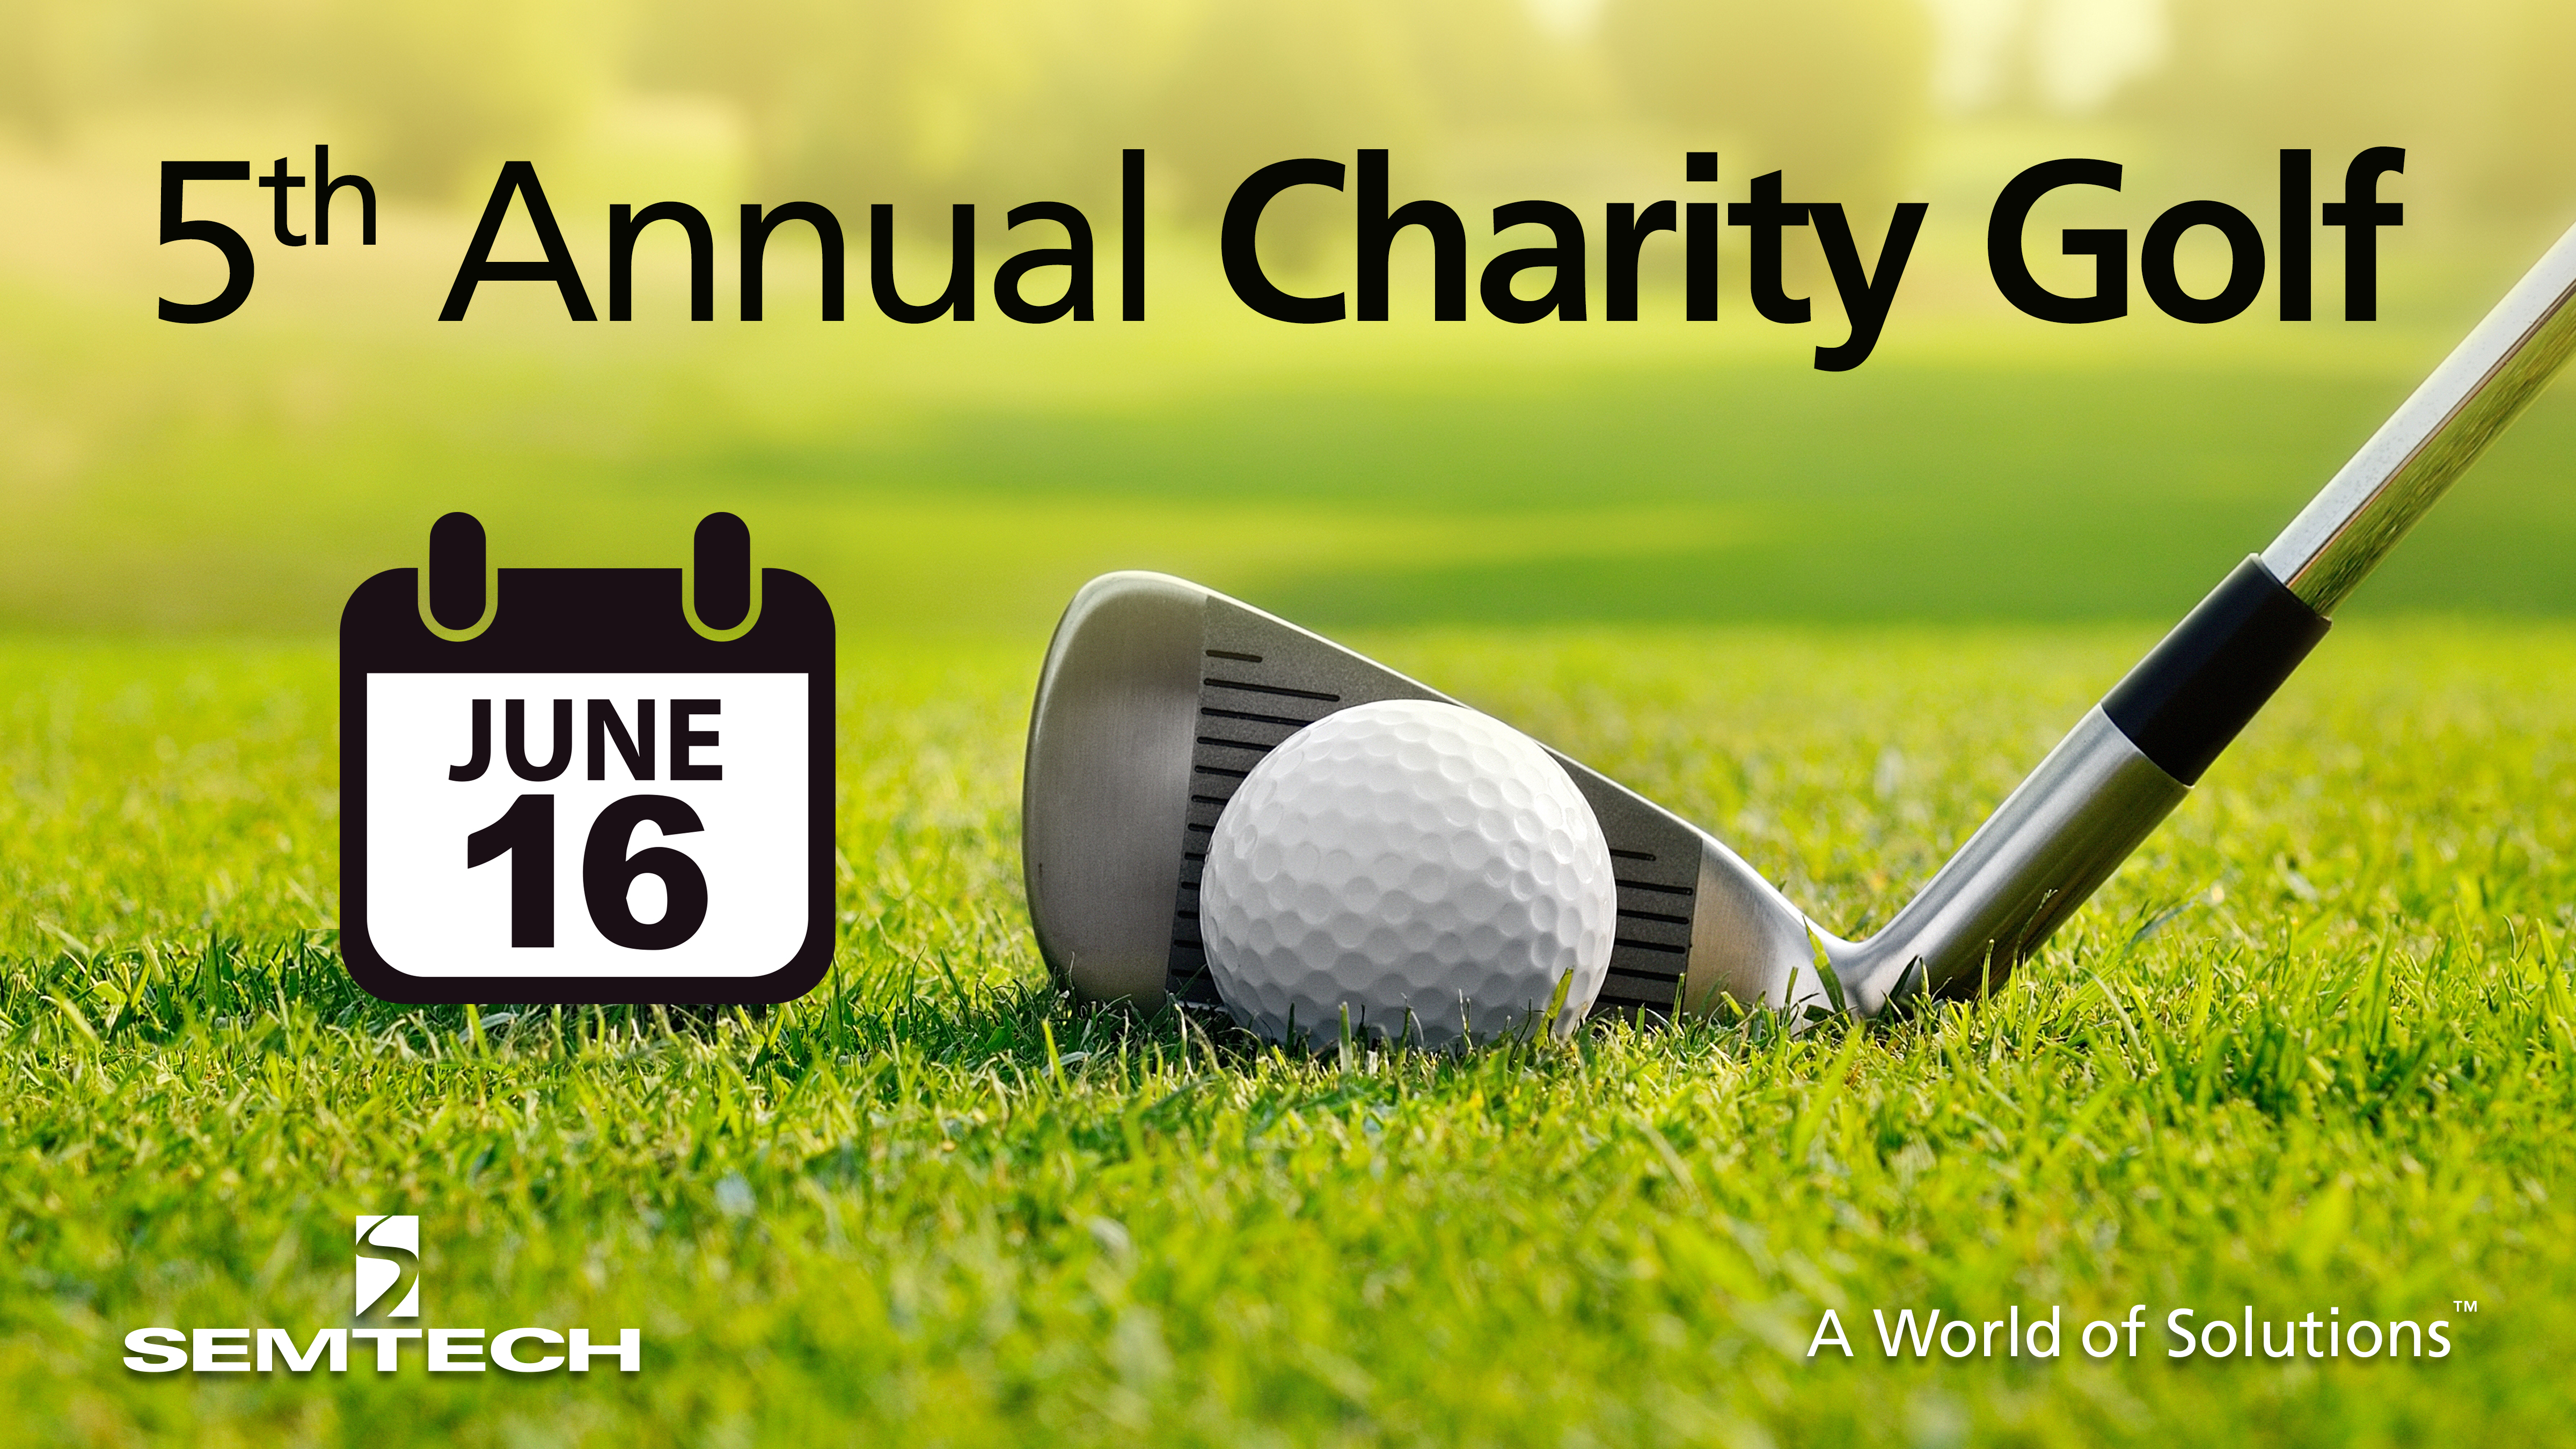 Semtech Hosts 5th Annual Charity Golf Tournament Supporting Ventura County Youth